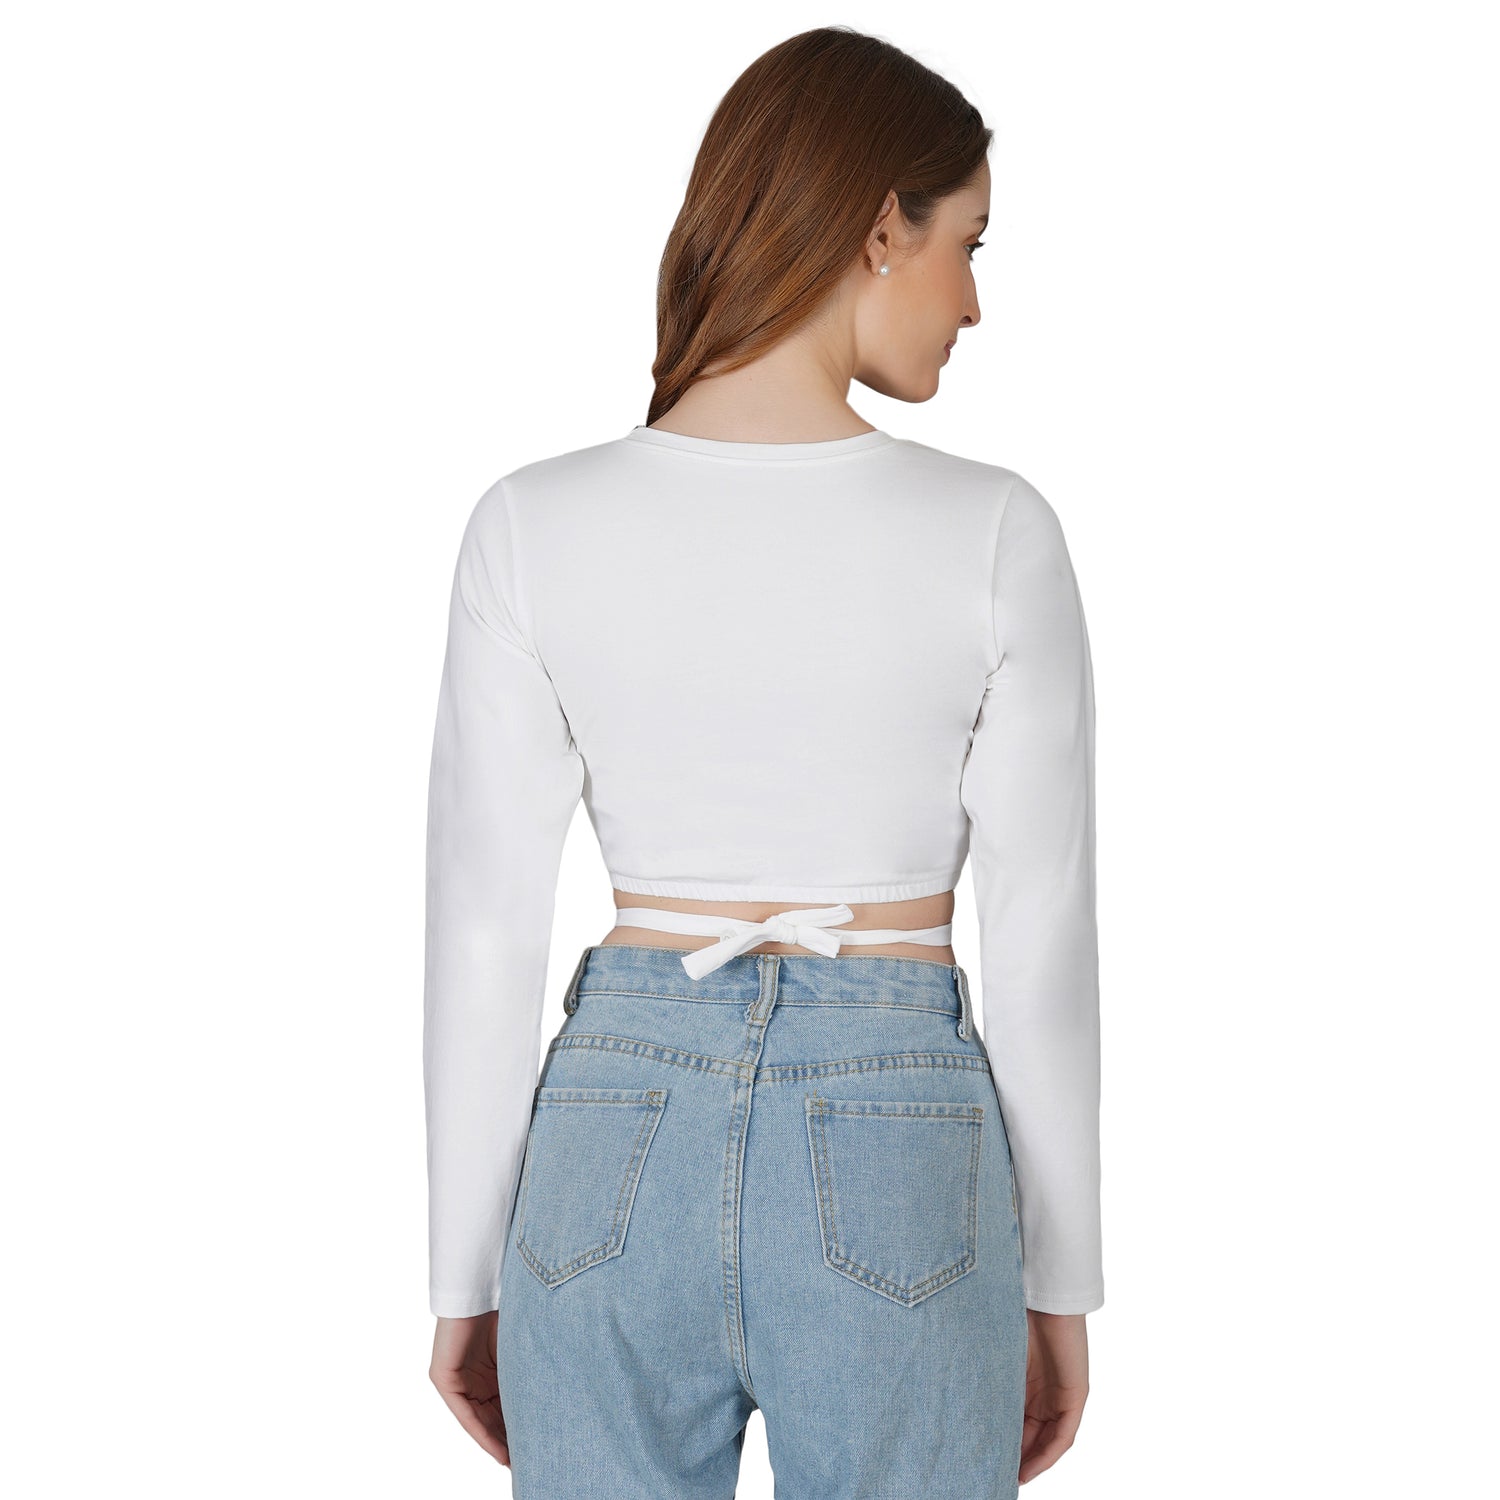 SLAY. Women's White Full Sleeves Crop Top with Back Wrap around Strings-clothing-to-slay.myshopify.com-Crop Top